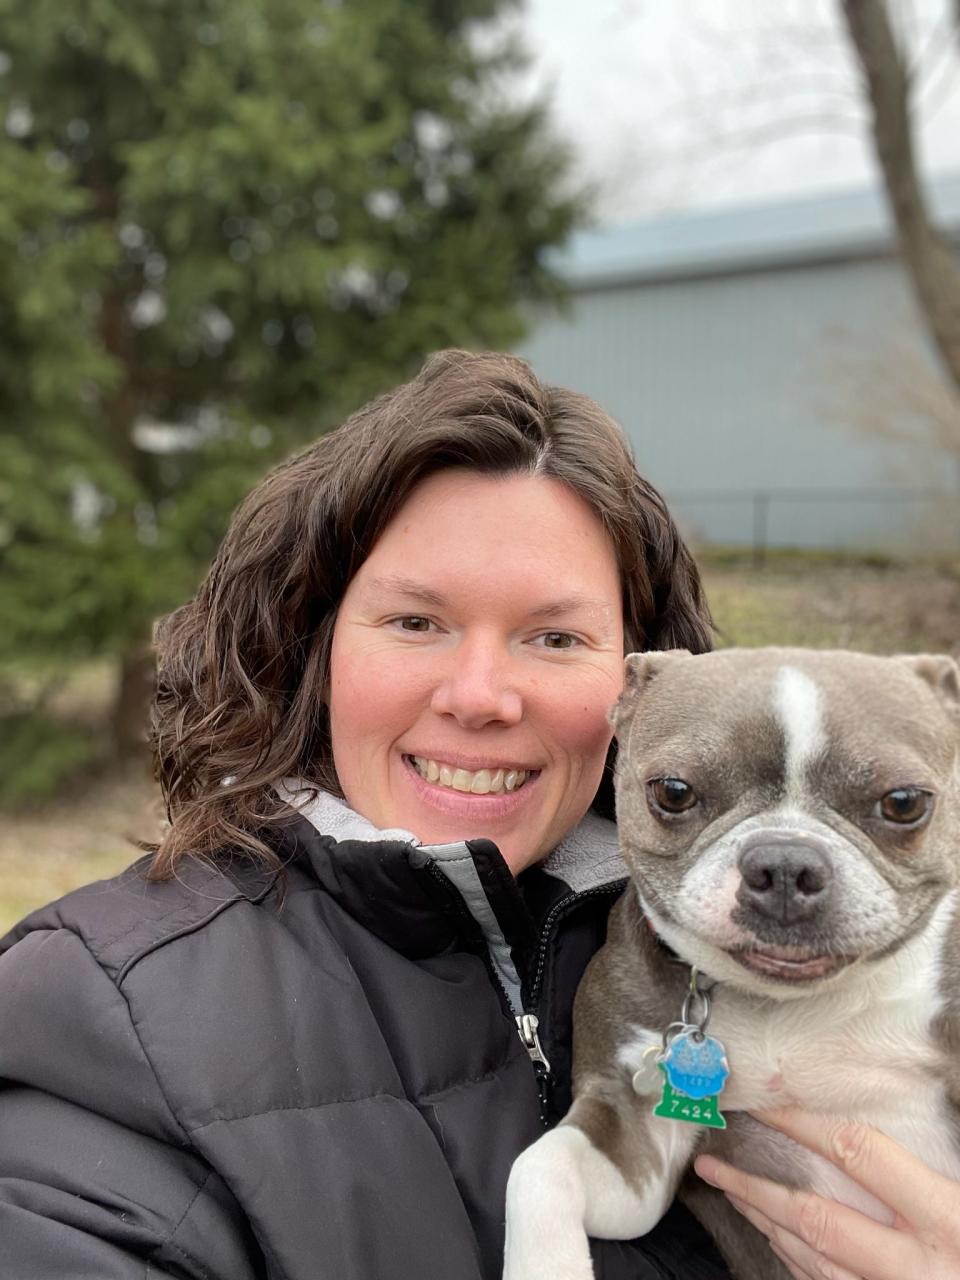 Julie McNamara, owner and president of Off Doody Pet Waste Solutions, says the company is a way for her to fulfill her love of pets and entrepreneurship.